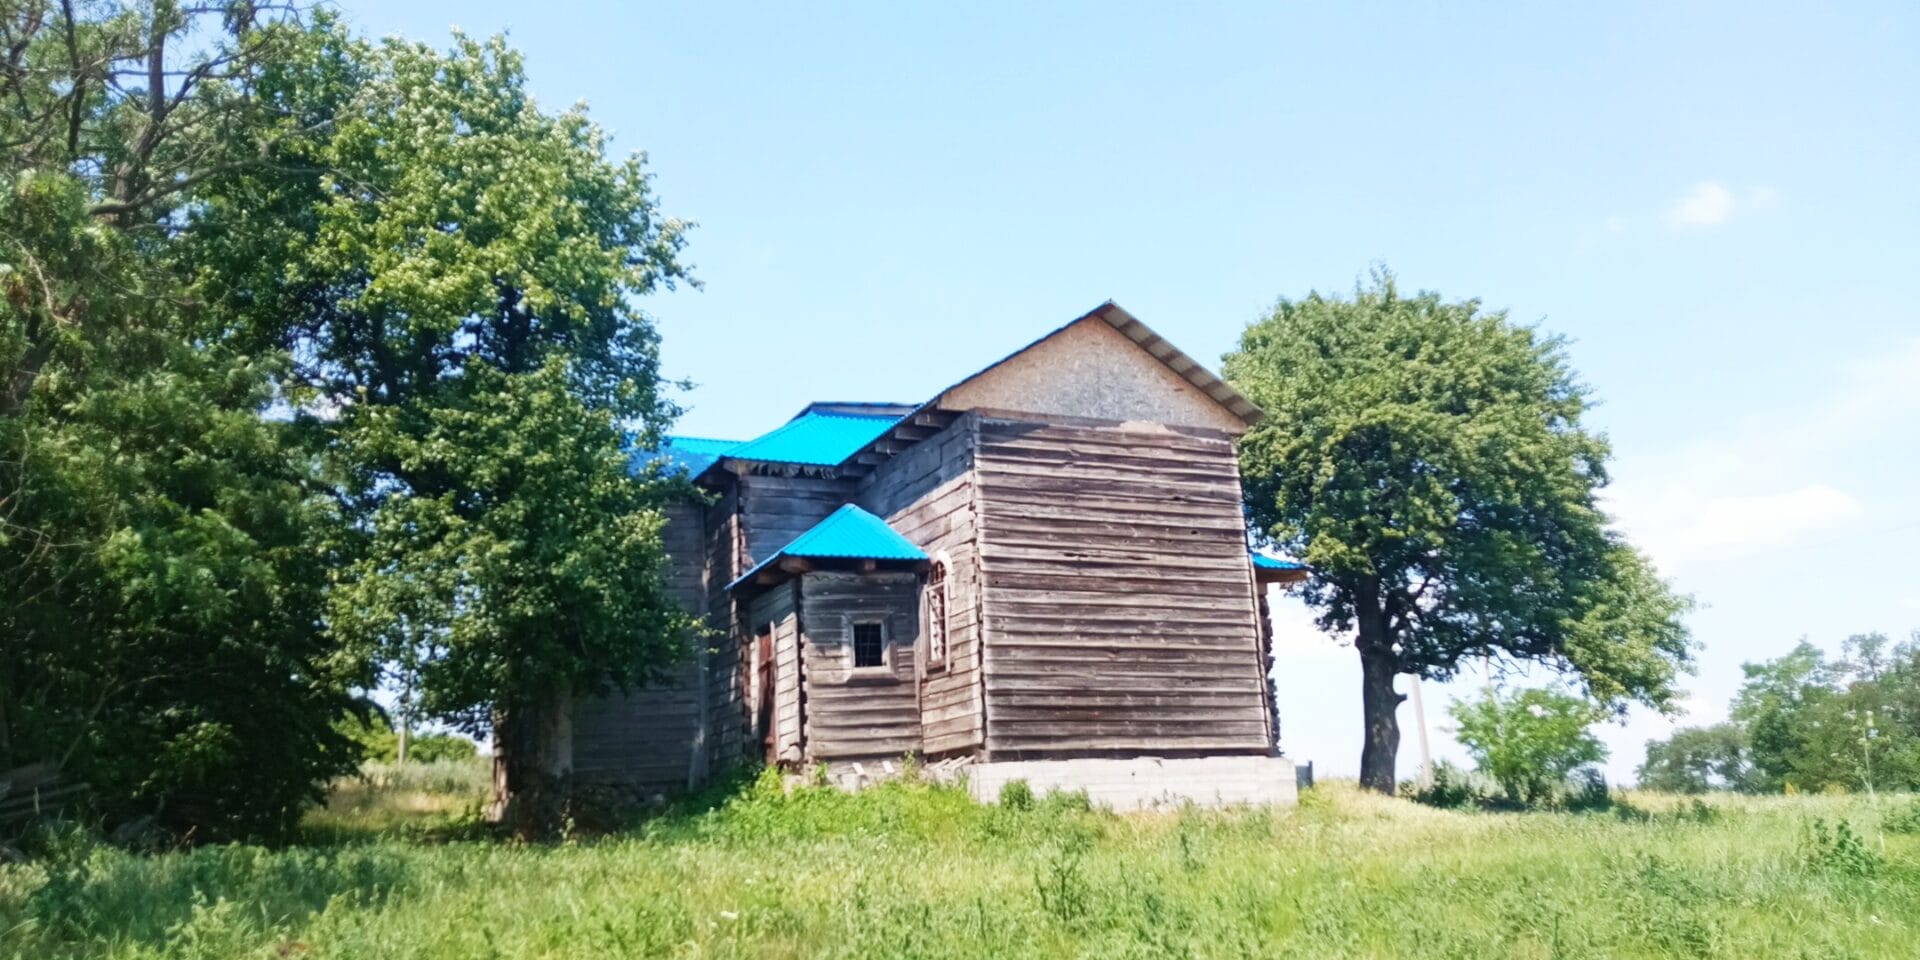 A wooden church in the village of Olianyne